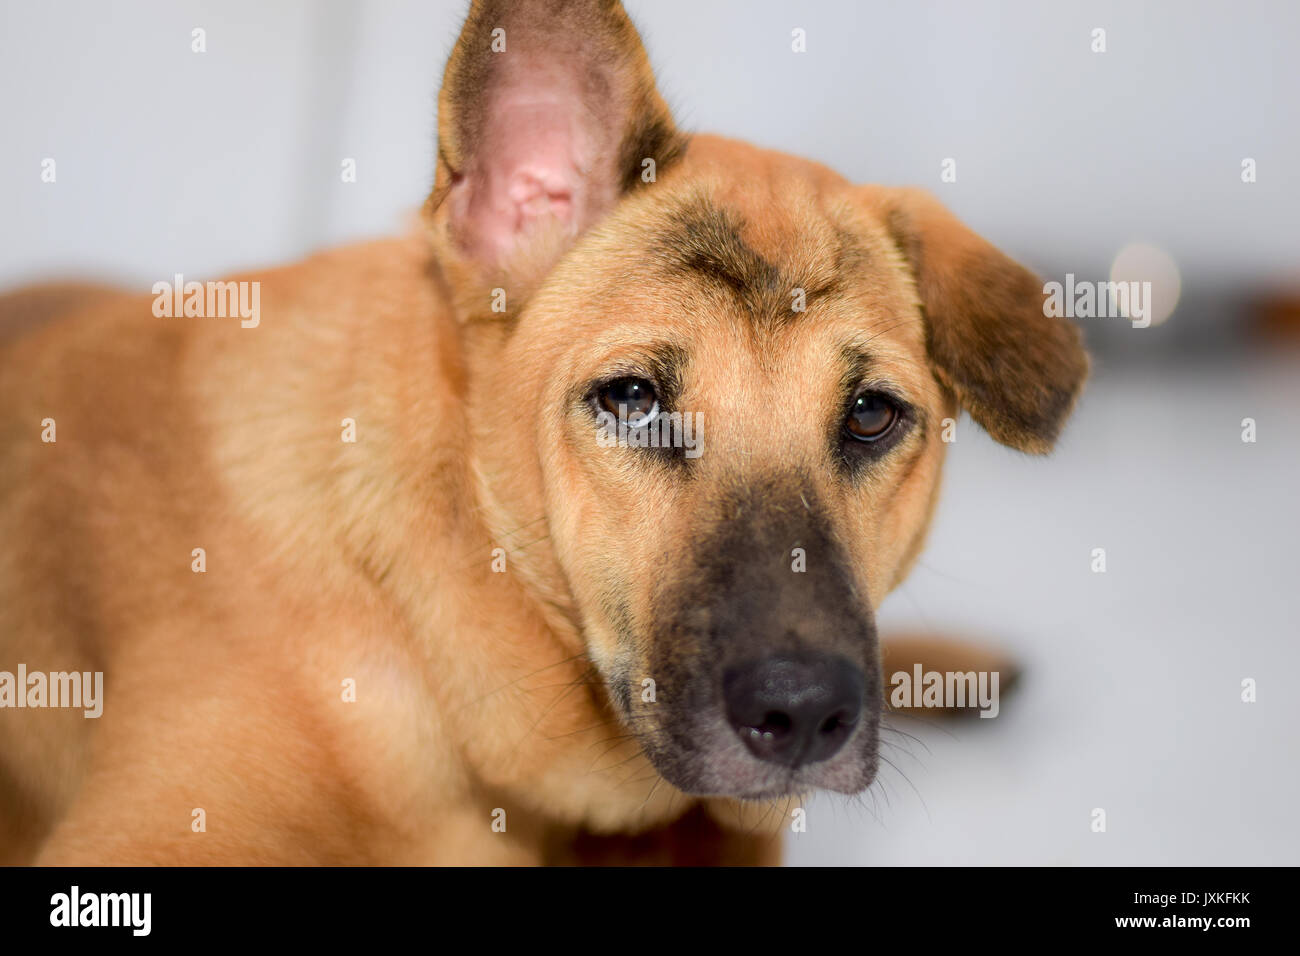 The domestic dog is lying on the floor Stock Photo